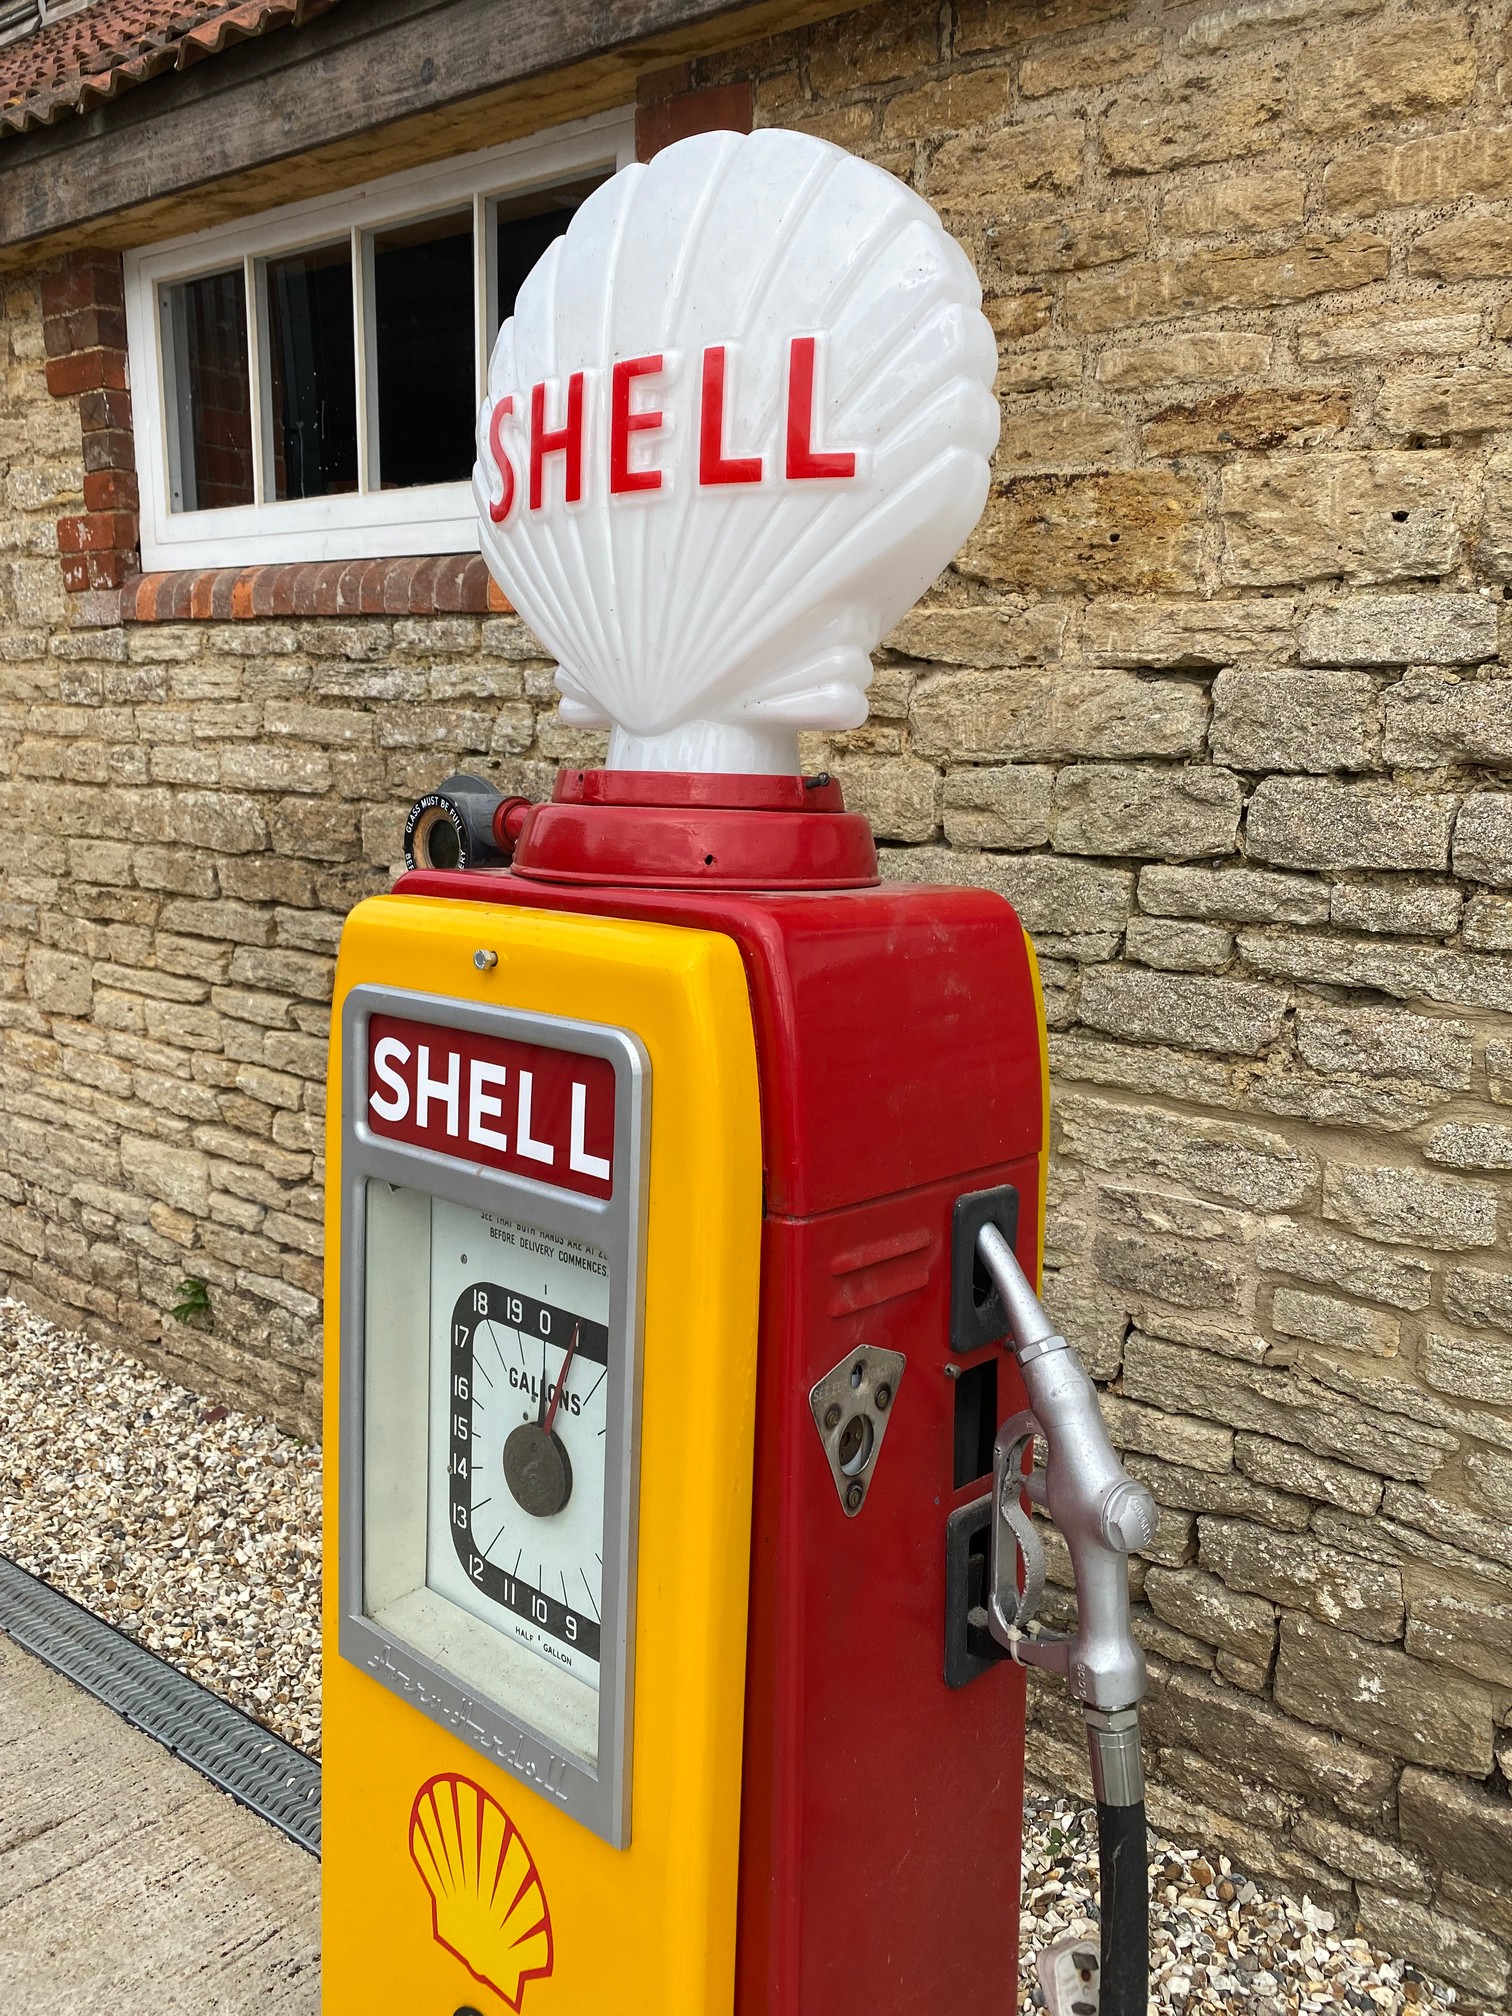 An Avery Hardoll electric petrol pump restored in Shell livery, with reproduction Shell globe, - Image 3 of 4